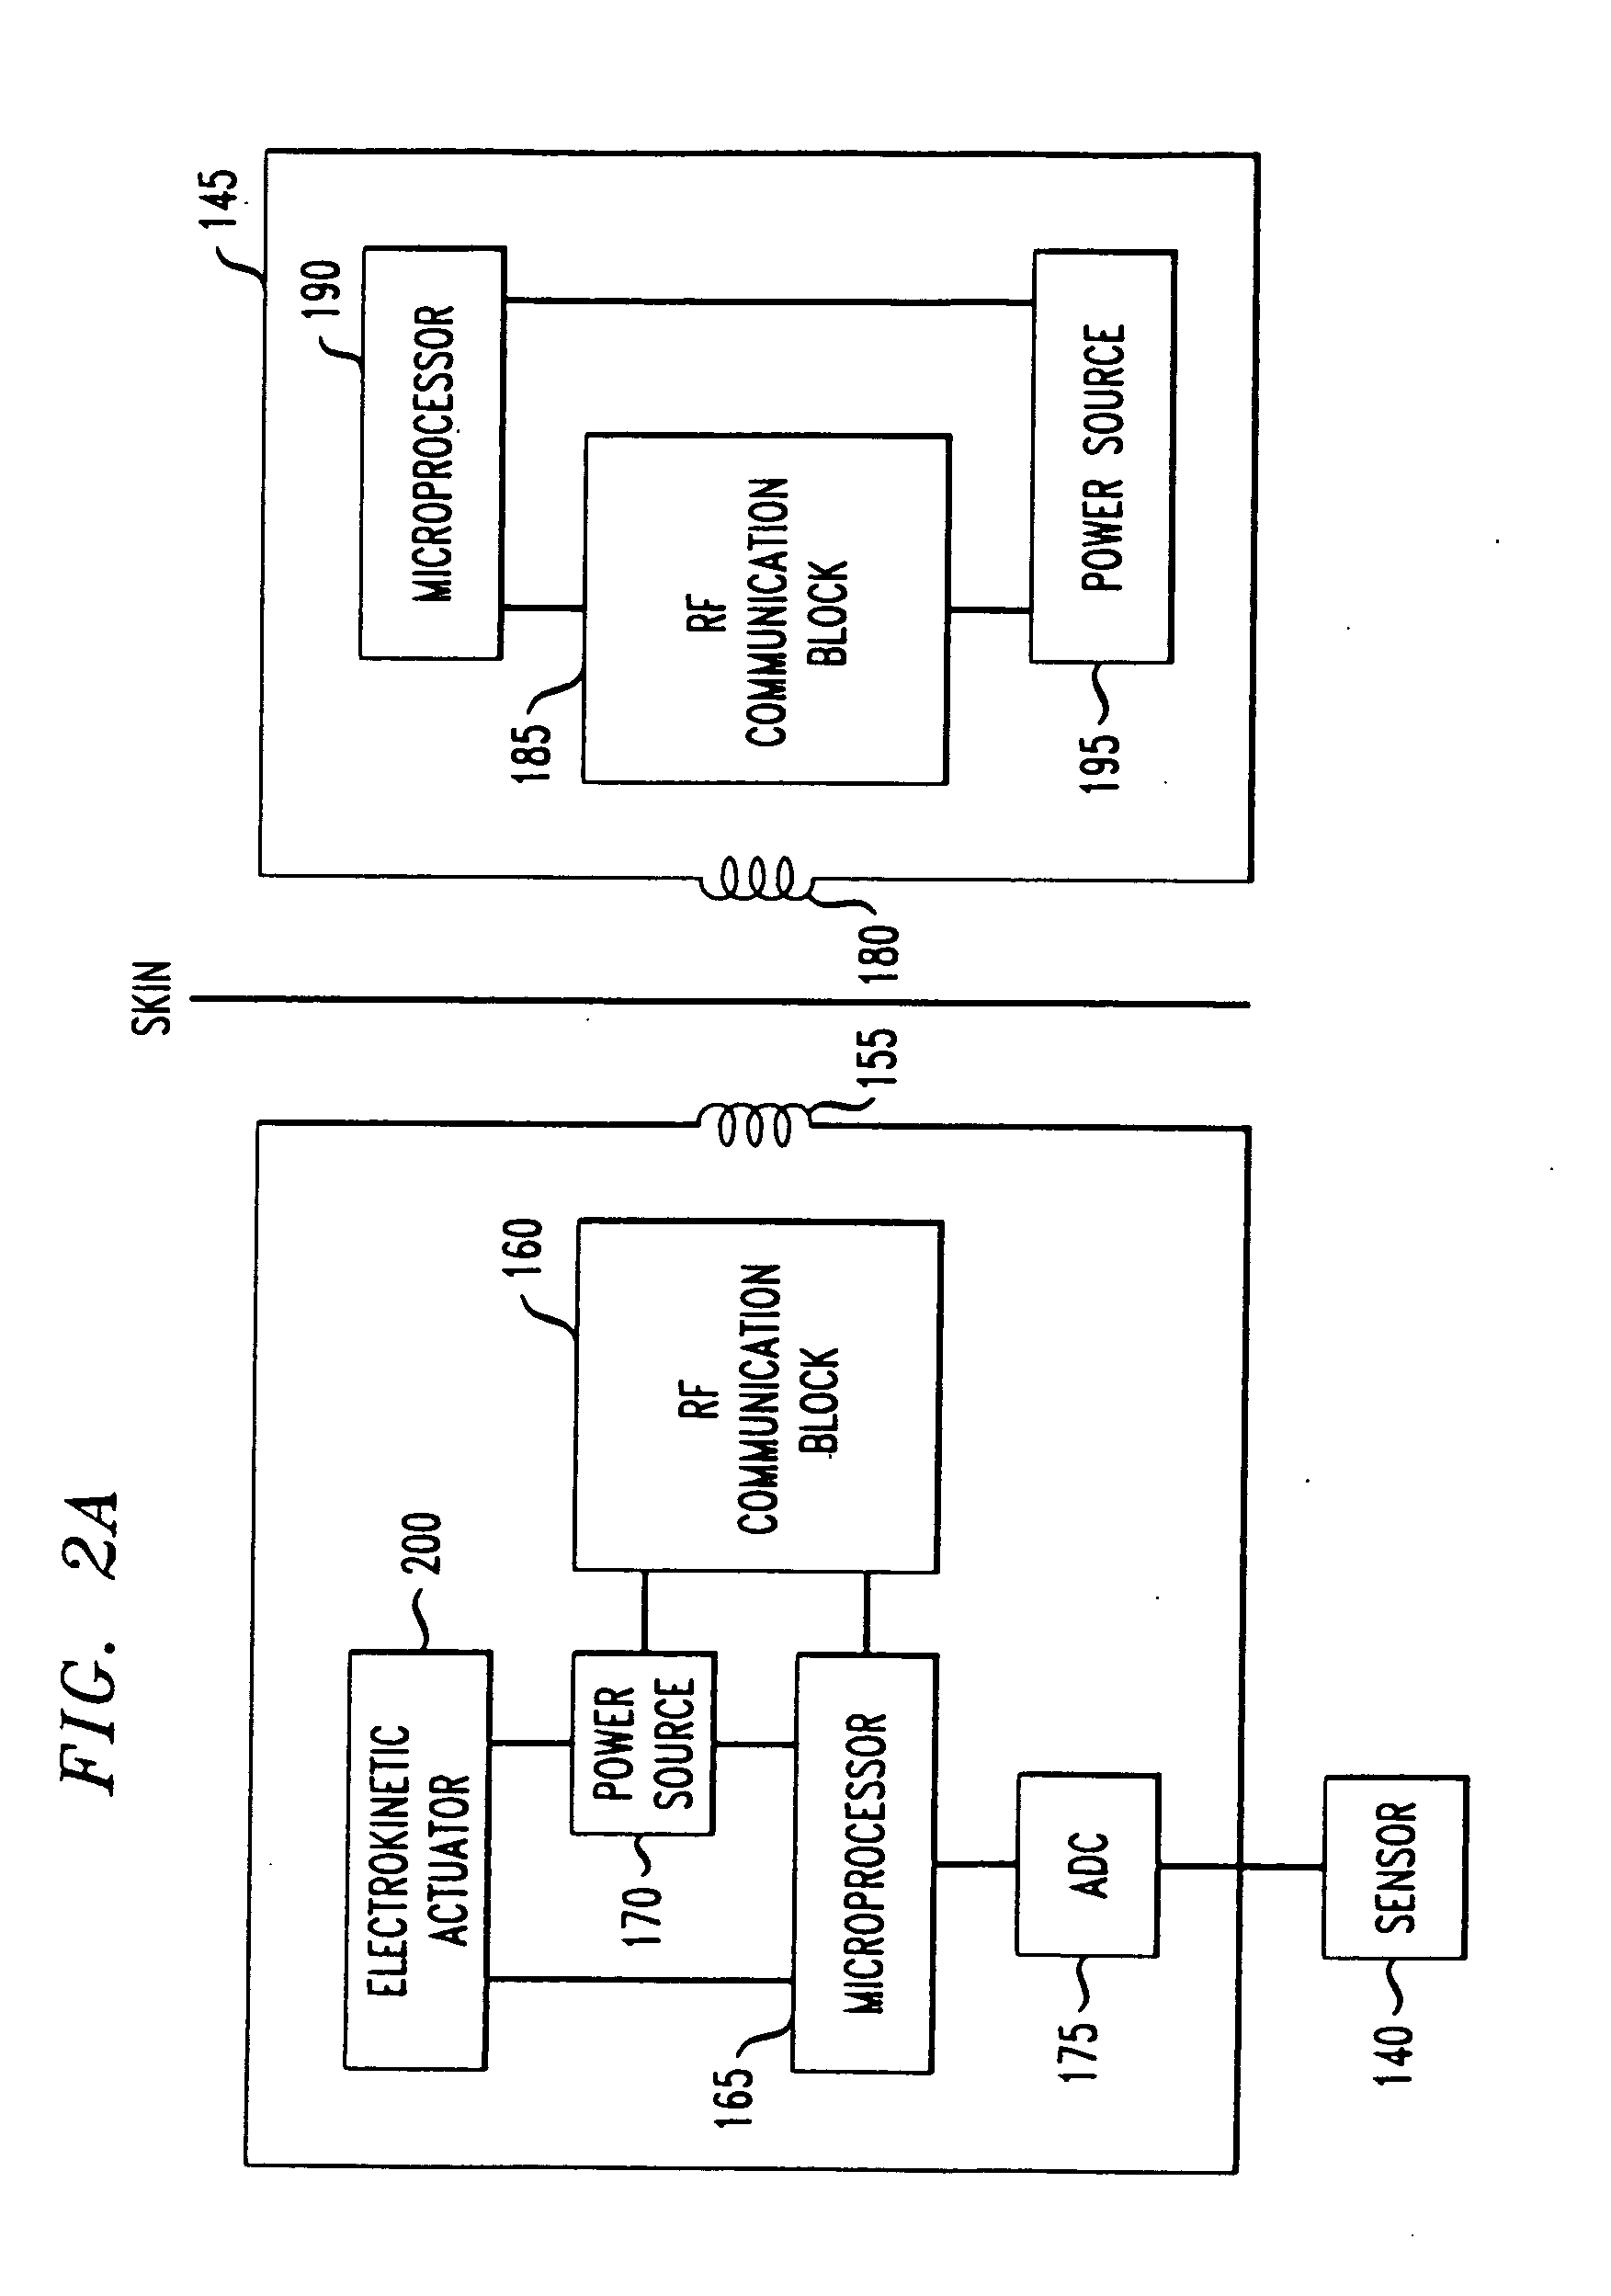 Electrokinetic actuator to titrate fluid flow